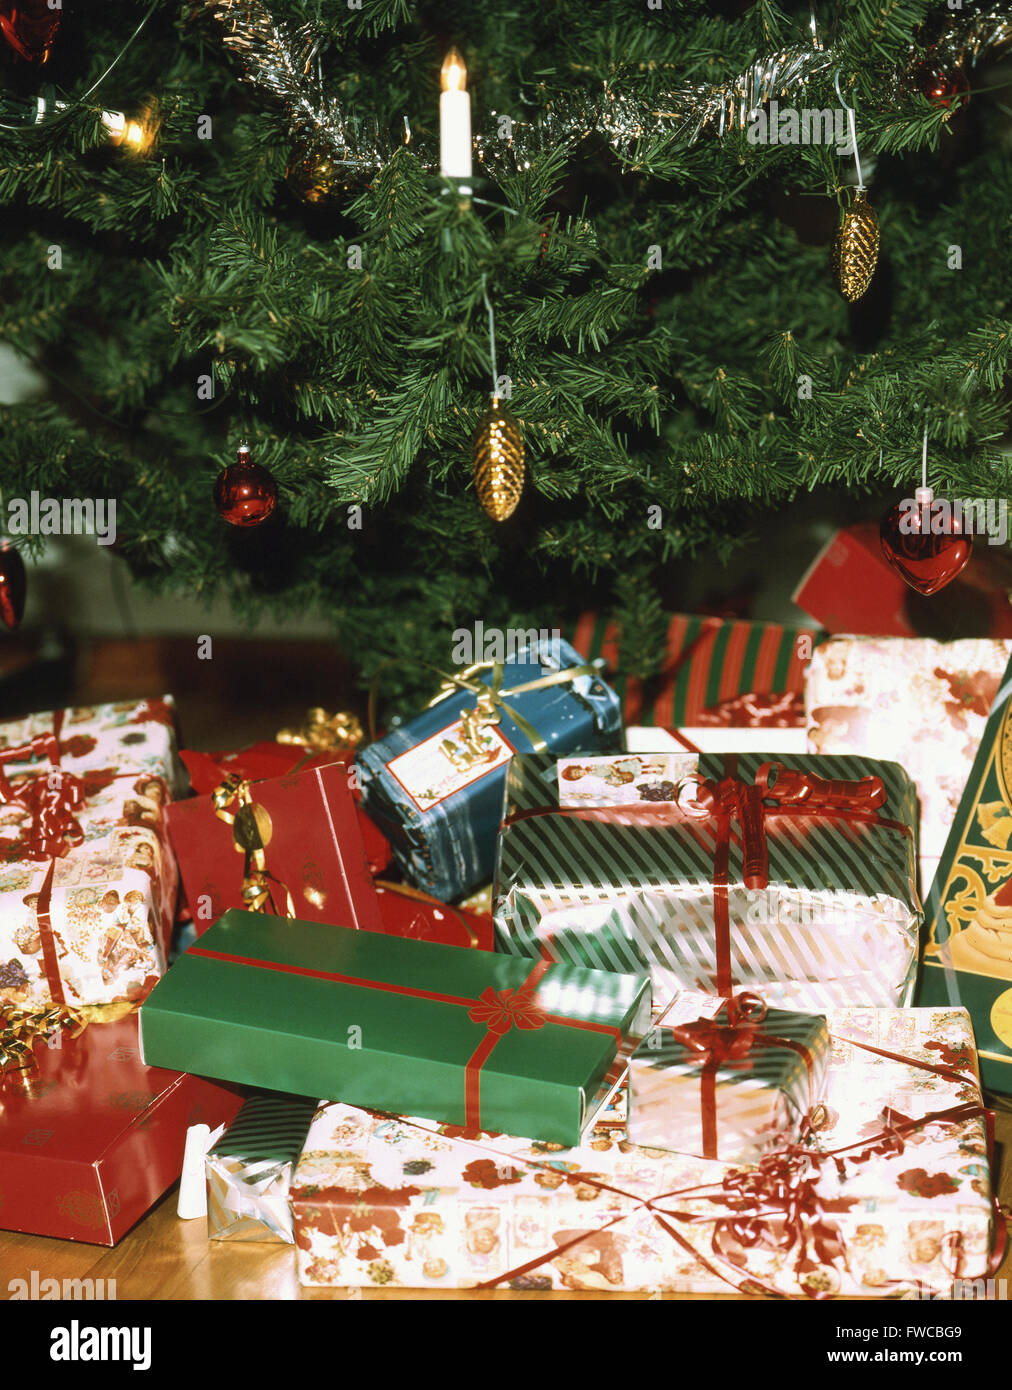 Christmas gifts under the Christmas tree Stock Photo